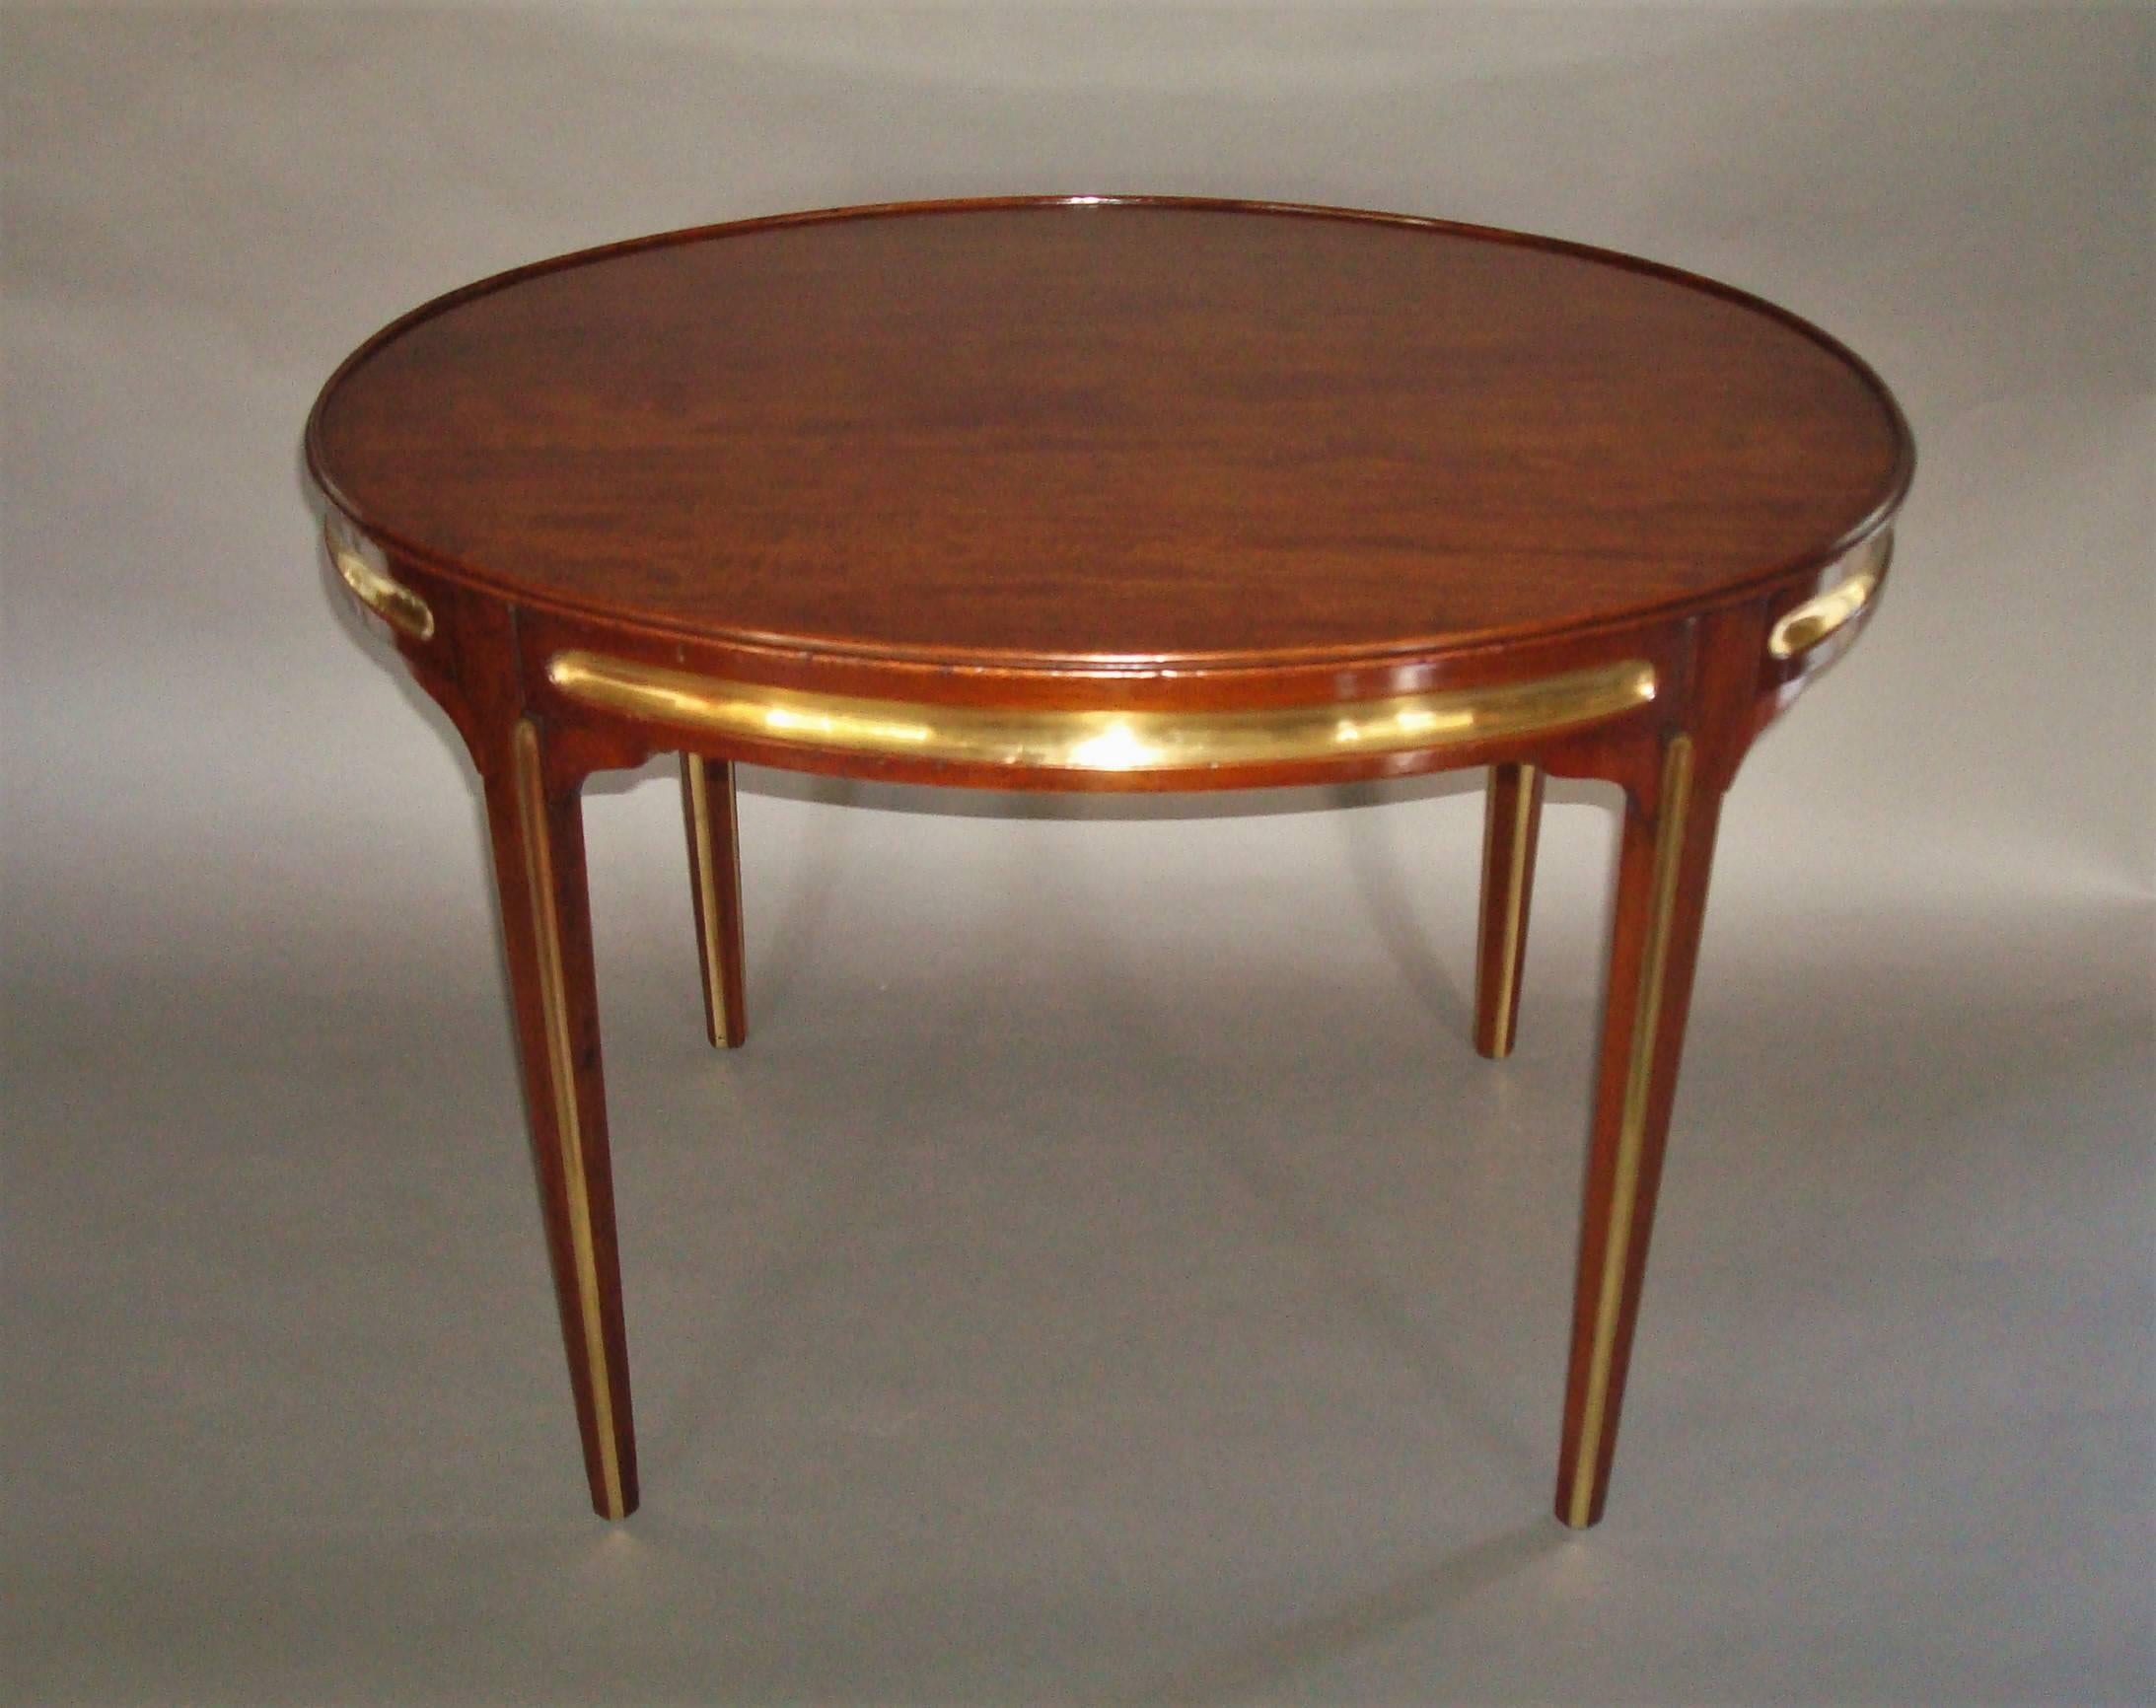 Polished Early 20th Century Oval Mahogany and Brass Low Table For Sale